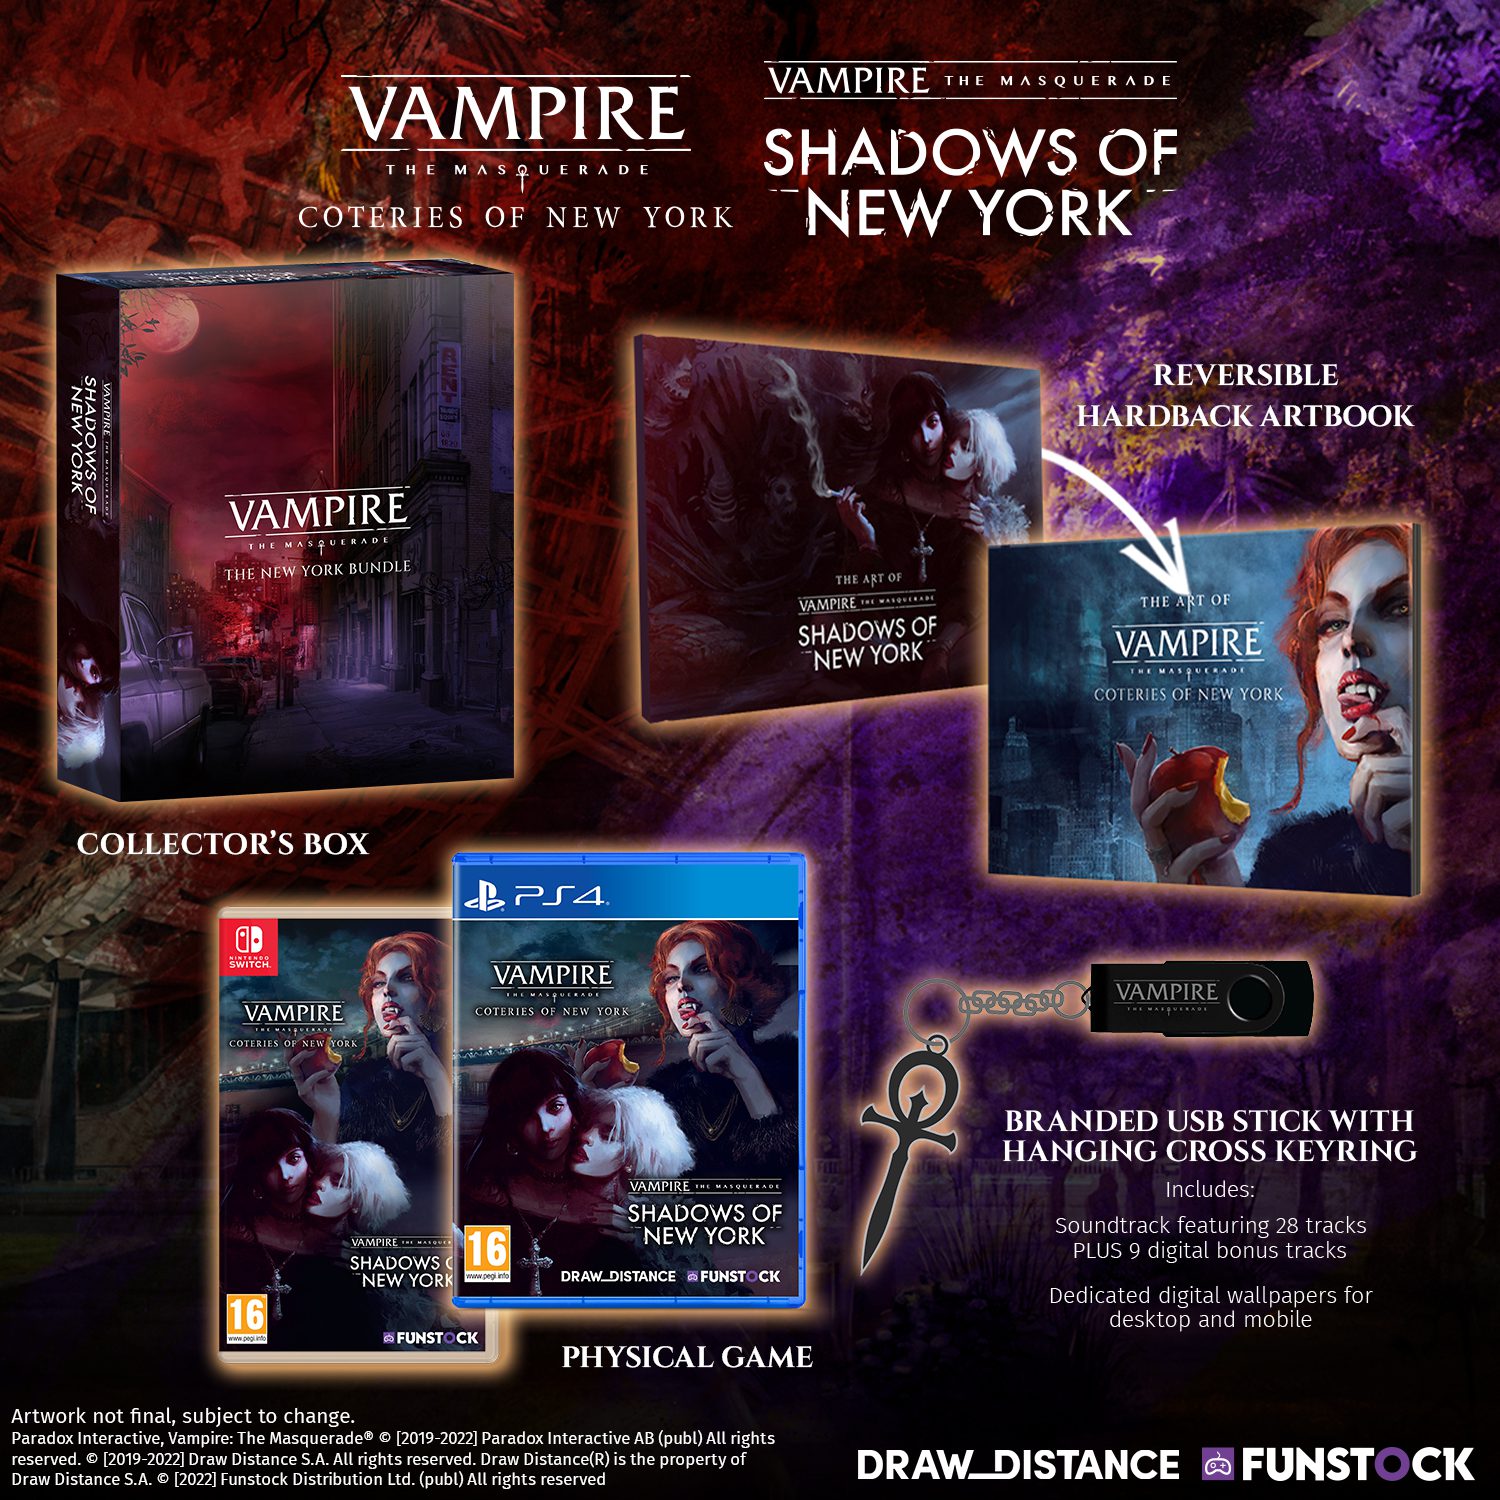 Vampire The Masquerade Coteries Of New York And Shadows of New York Collectors Edition contents